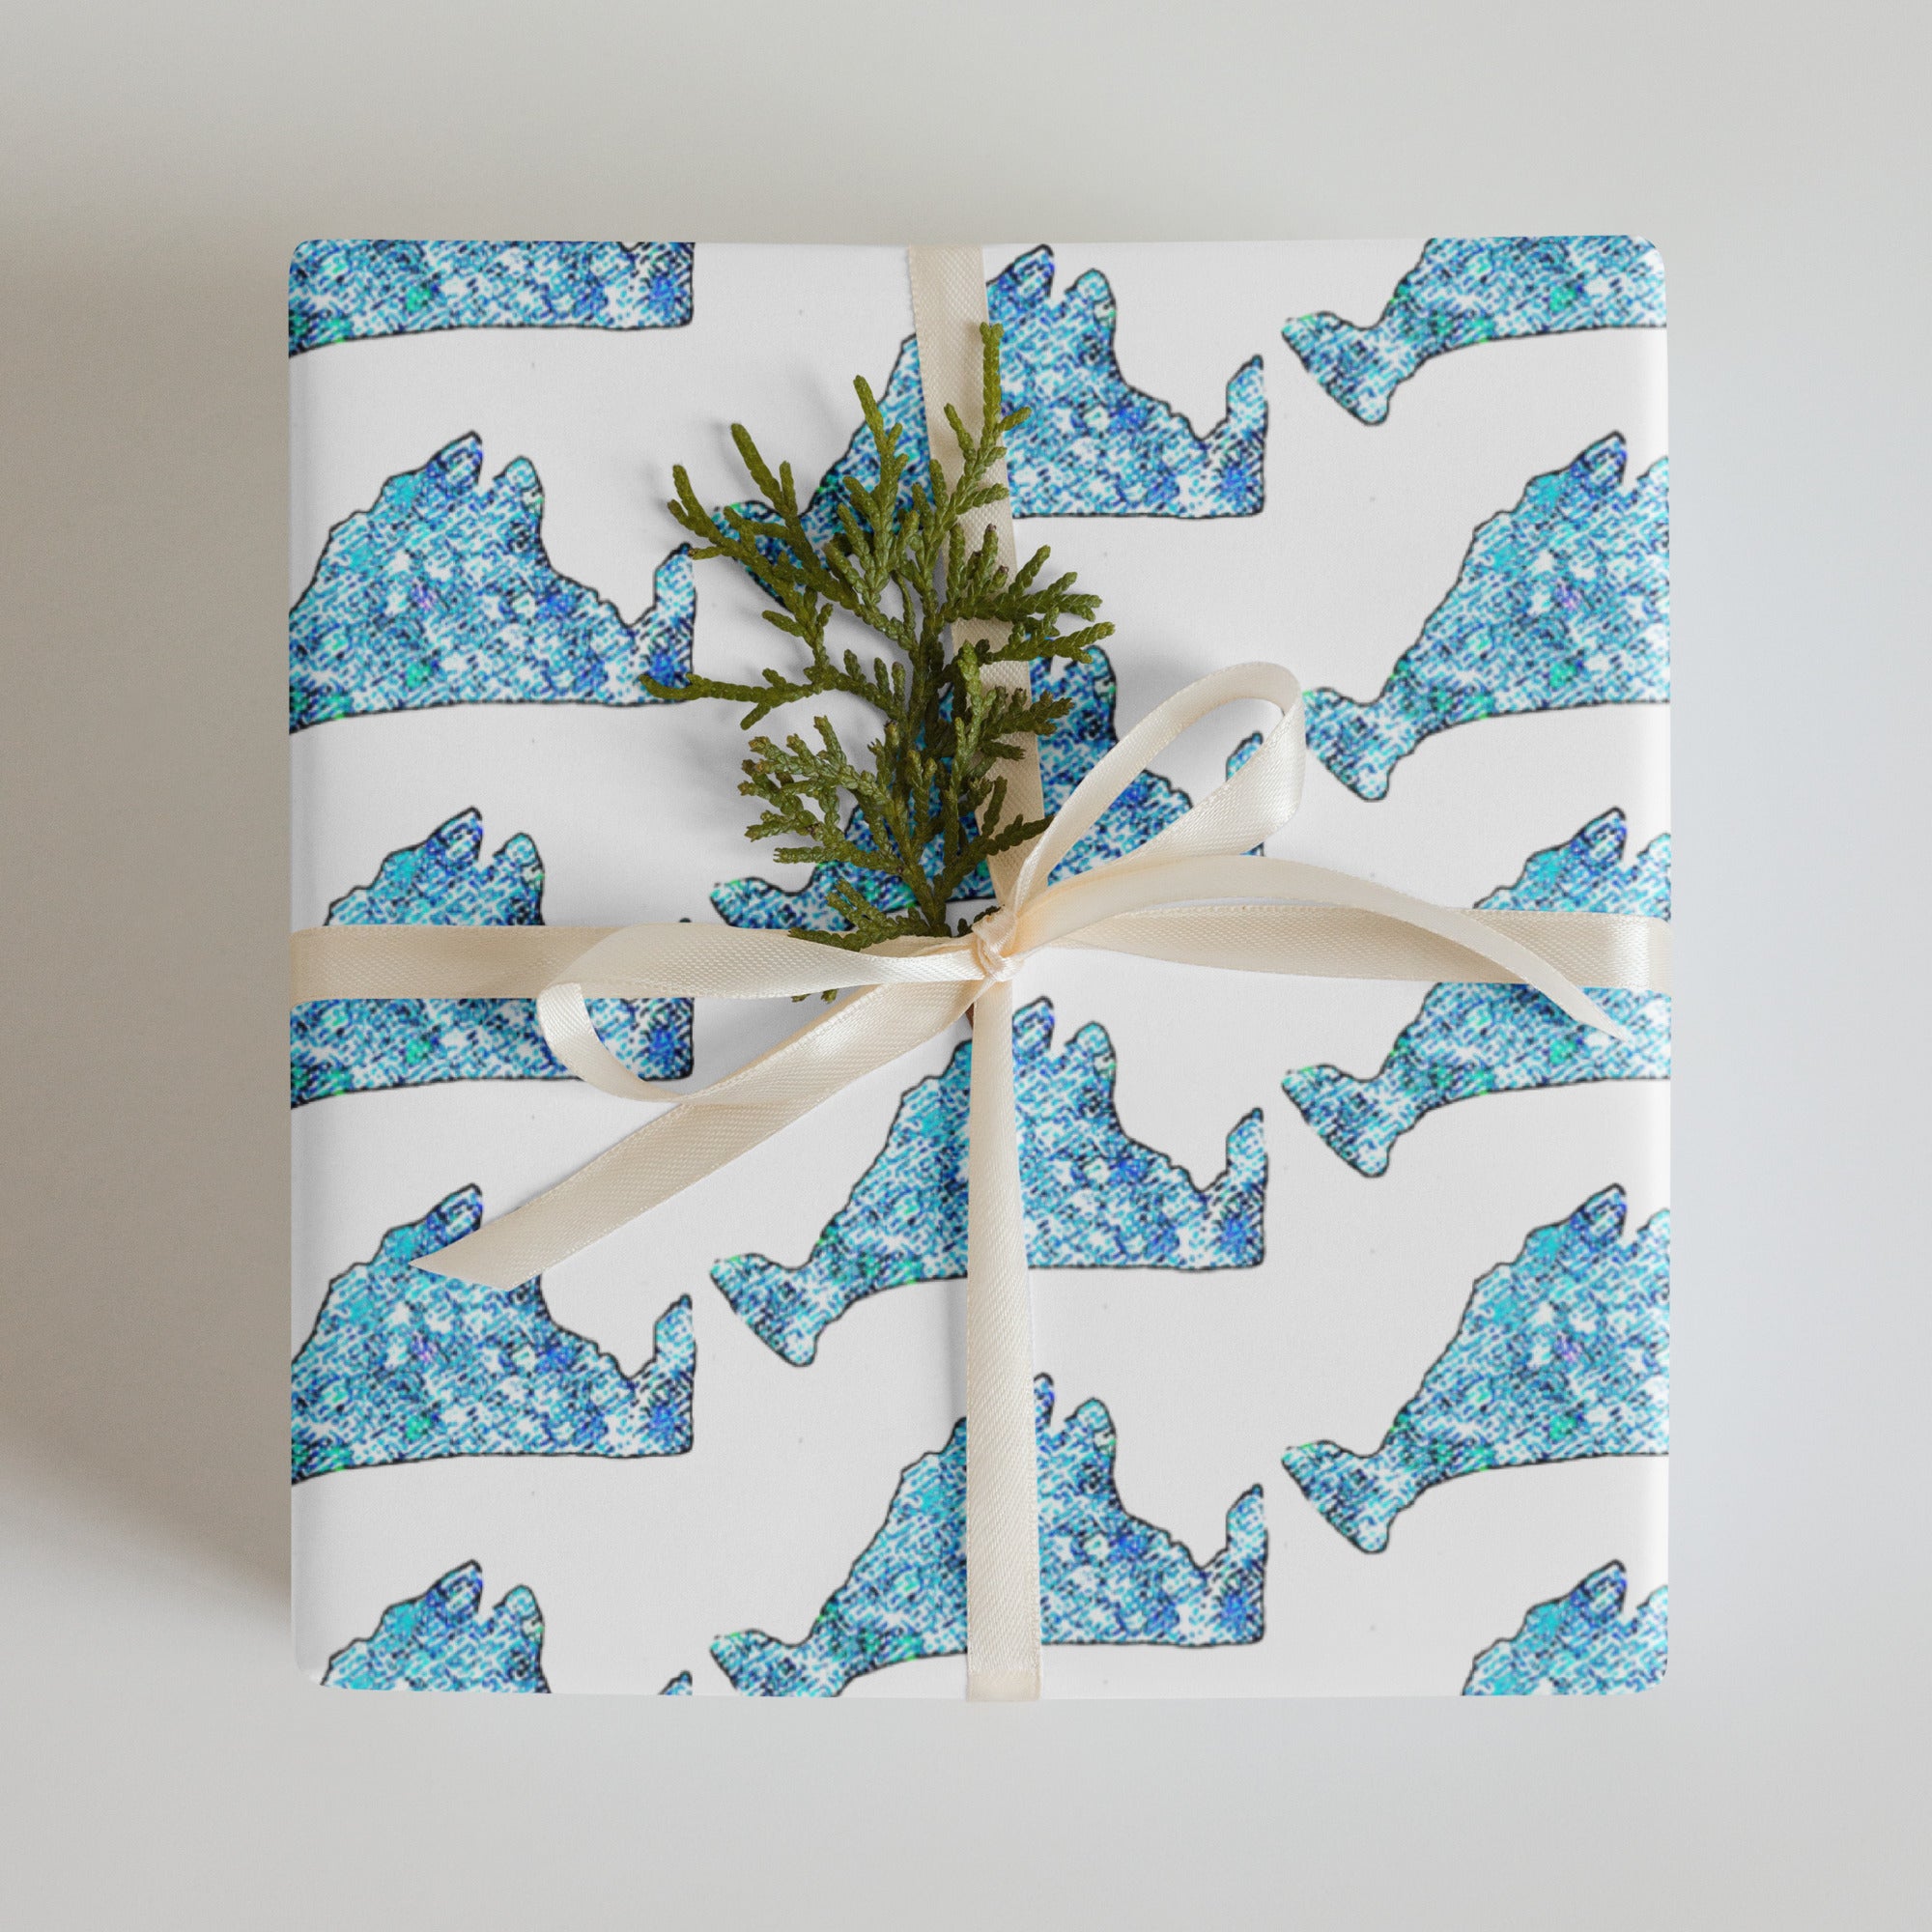 Blue Sparkle Wrapping Paper Sheets